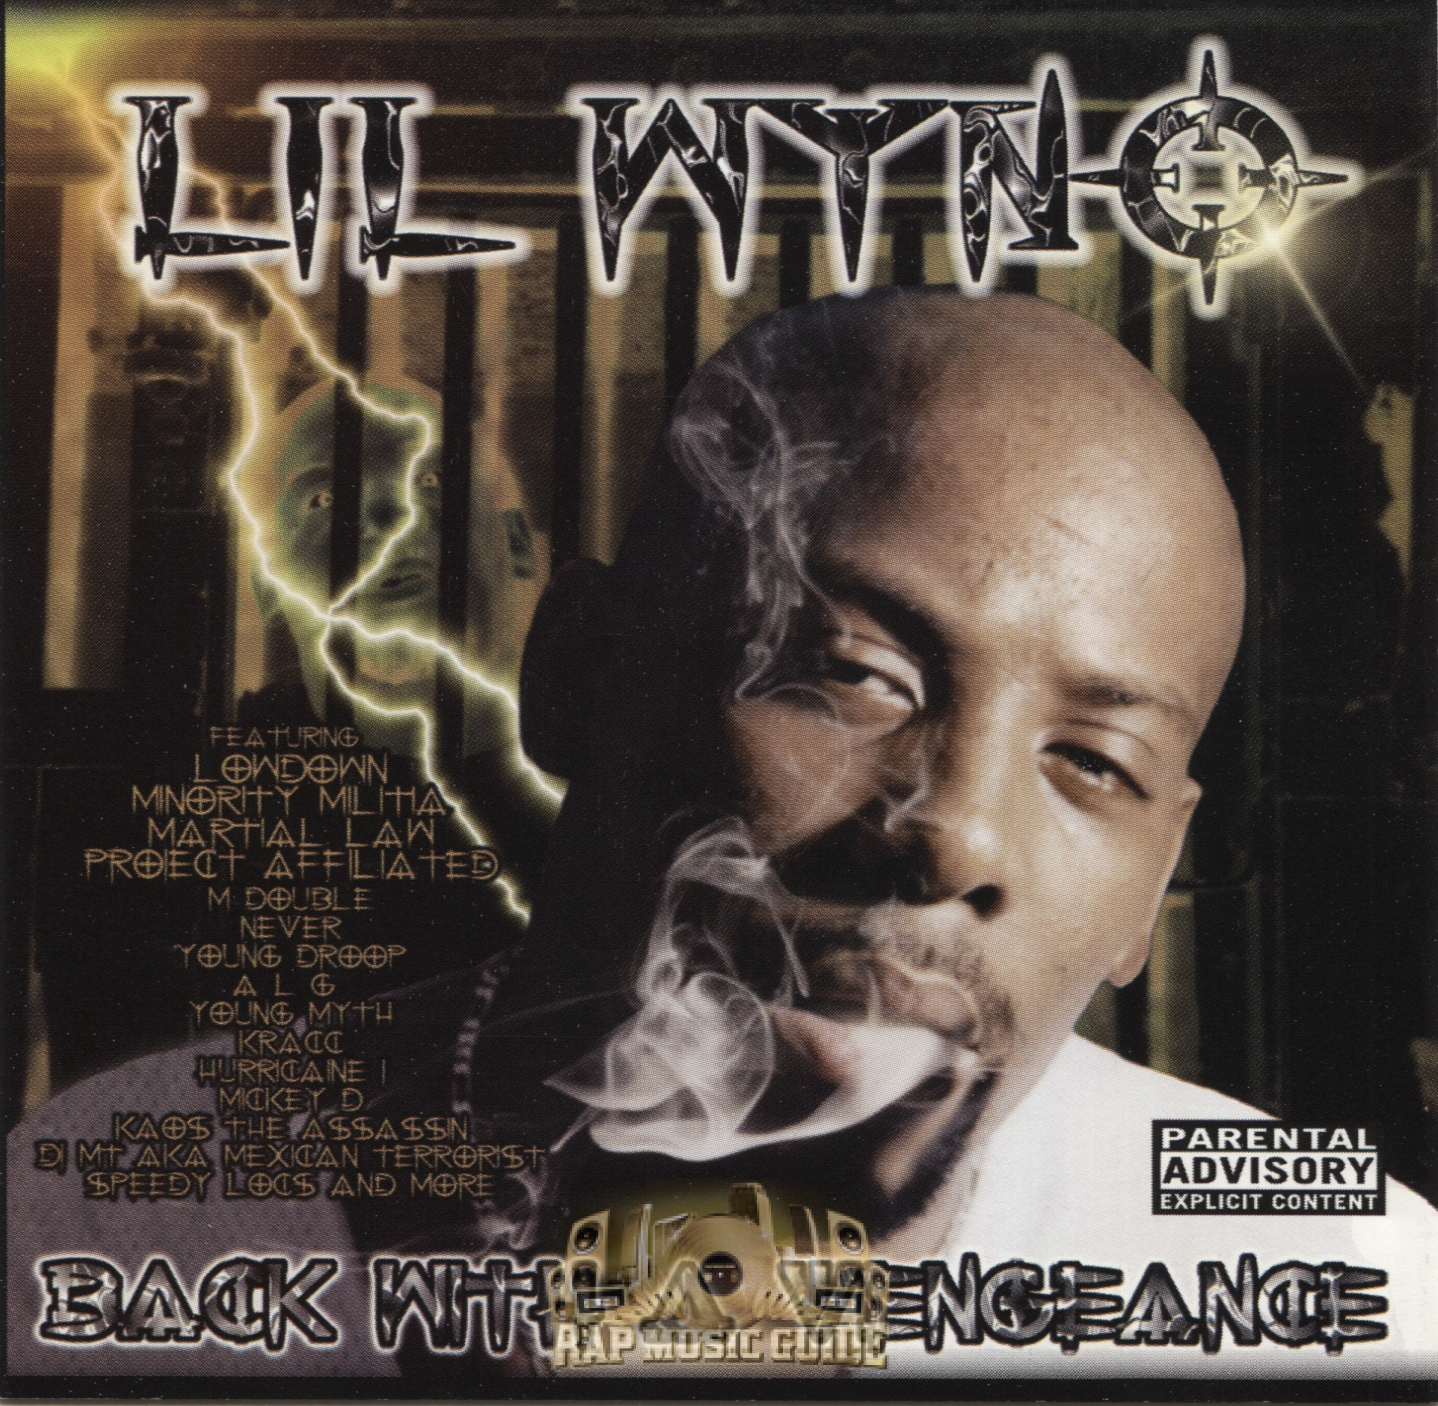 Lil Wyno - Back With A Vengeance: CD | Rap Music Guide